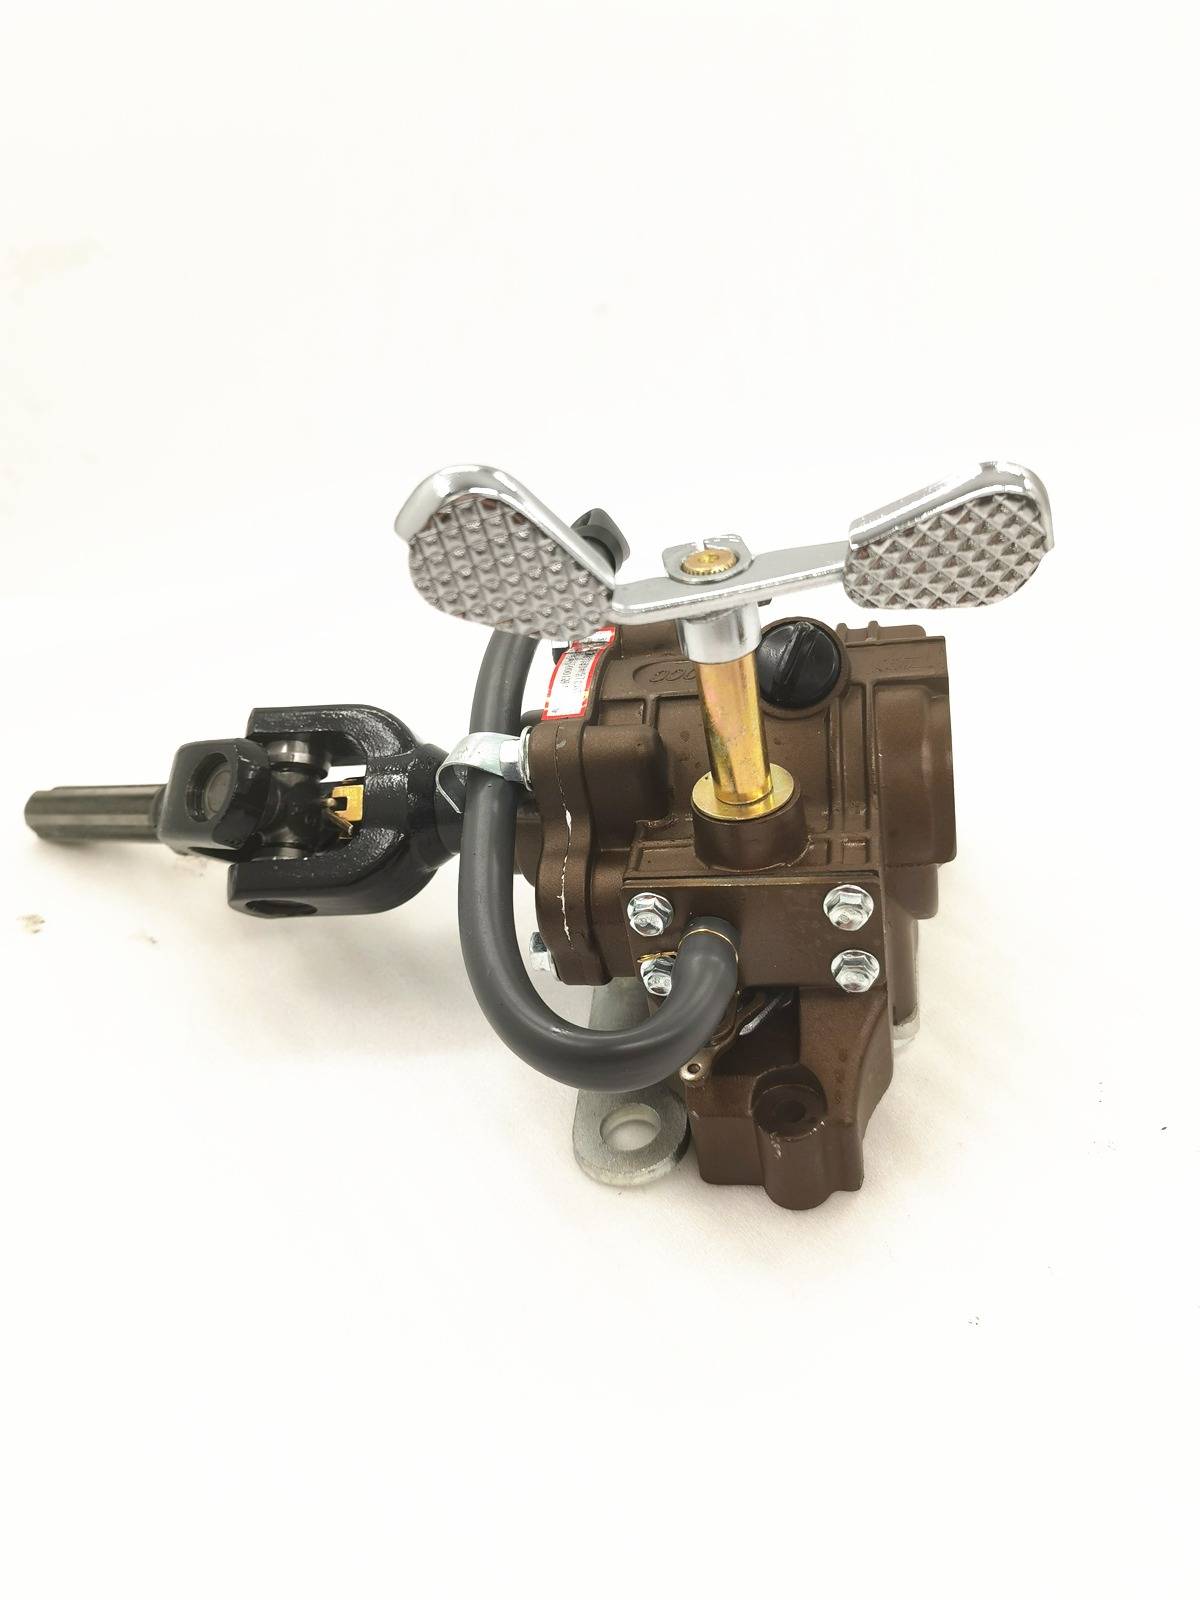 ChuanYu 280 reverse gear box CG150 motorcycle reverse gear box with big size base plate tricycle spare parts reverse gear box